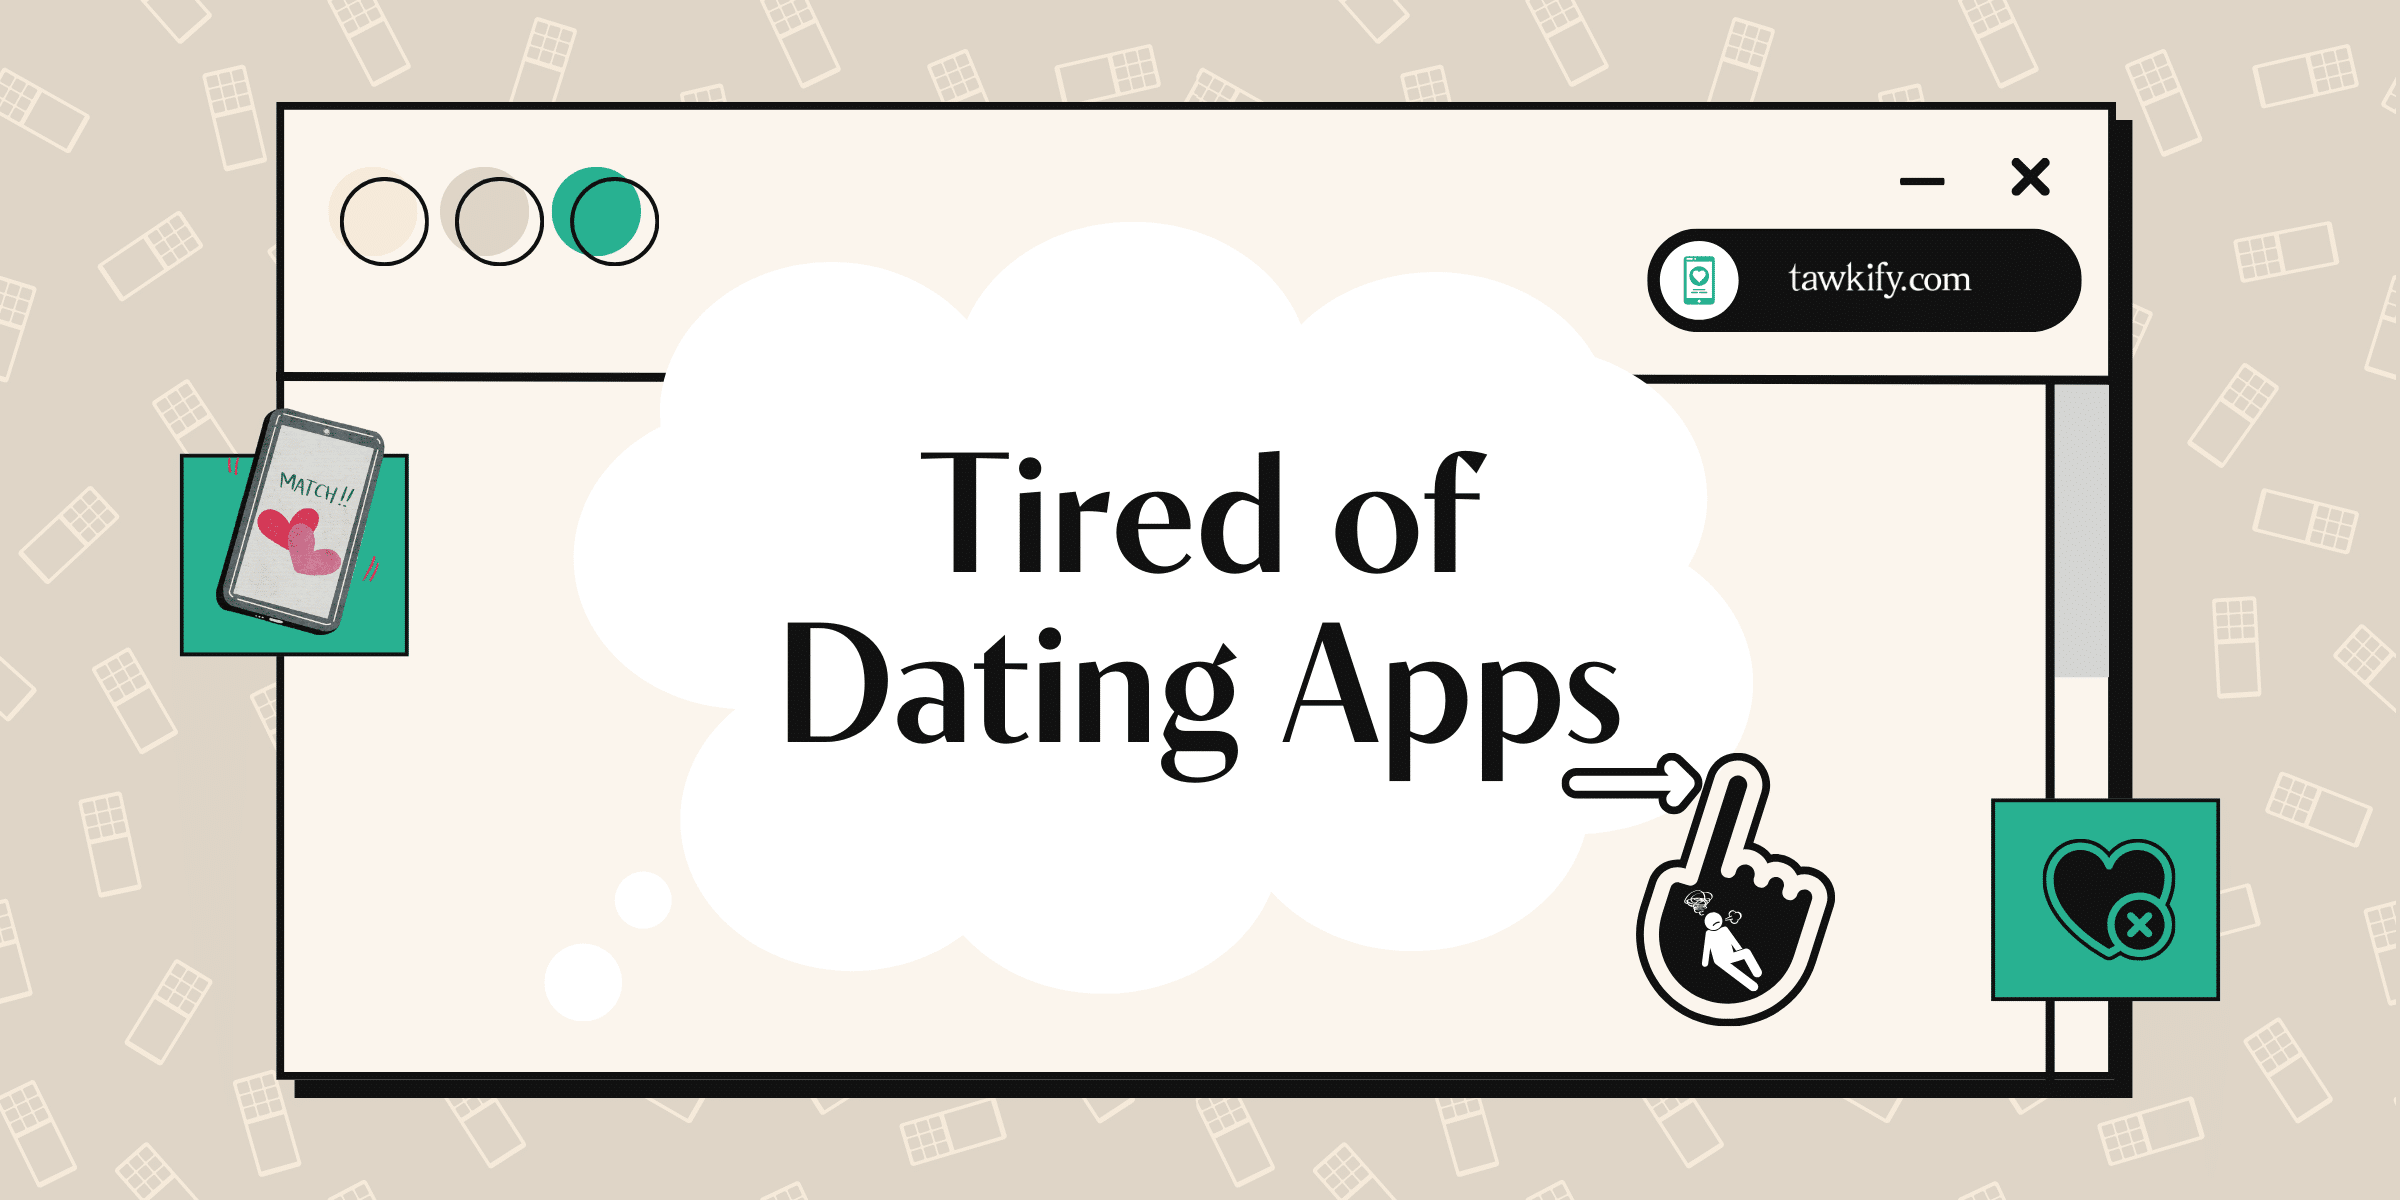 If you’re experiencing dating app burnout, then it’s time to explore some alternatives to dating apps. Follow our guide for tips on finding love—without swiping right.